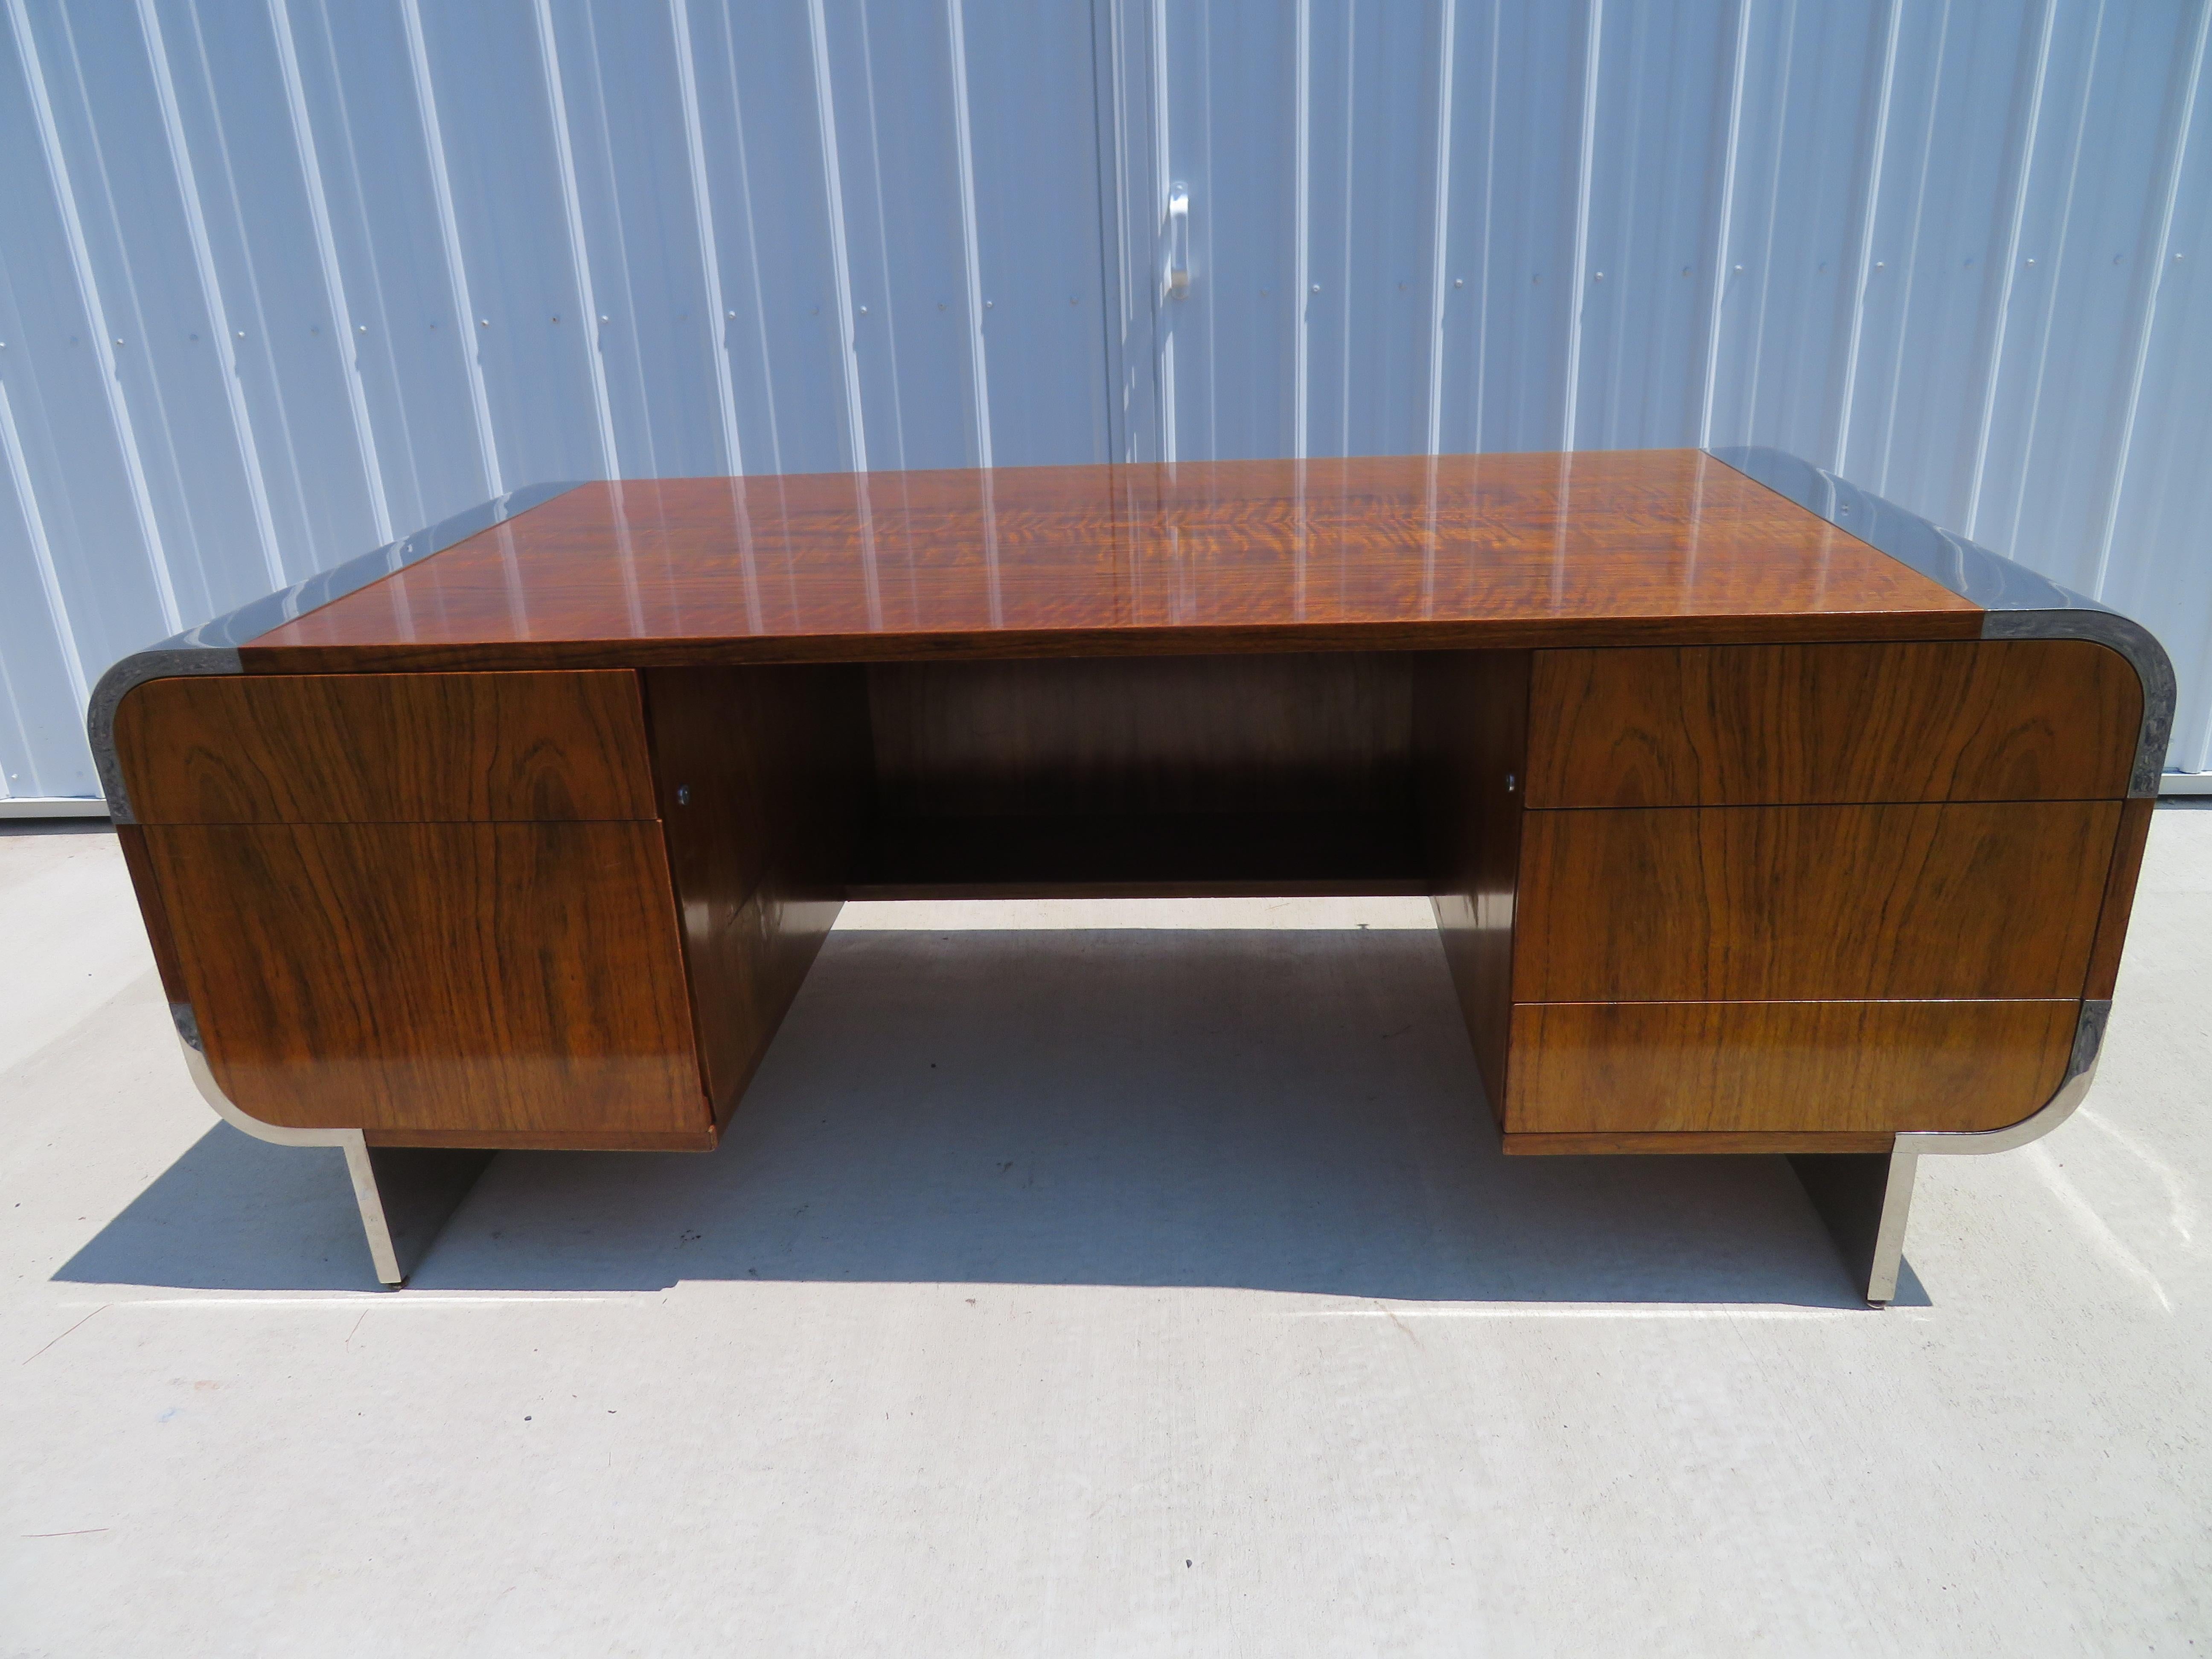 Stunning burled walnut and stainless steel desk by Pace, designed by Irving Rosen. Waterfall edges with polished stainless steel. 3 drawers flank the right side and 2 drawers flank the left side, including a large file drawer. Working lock with